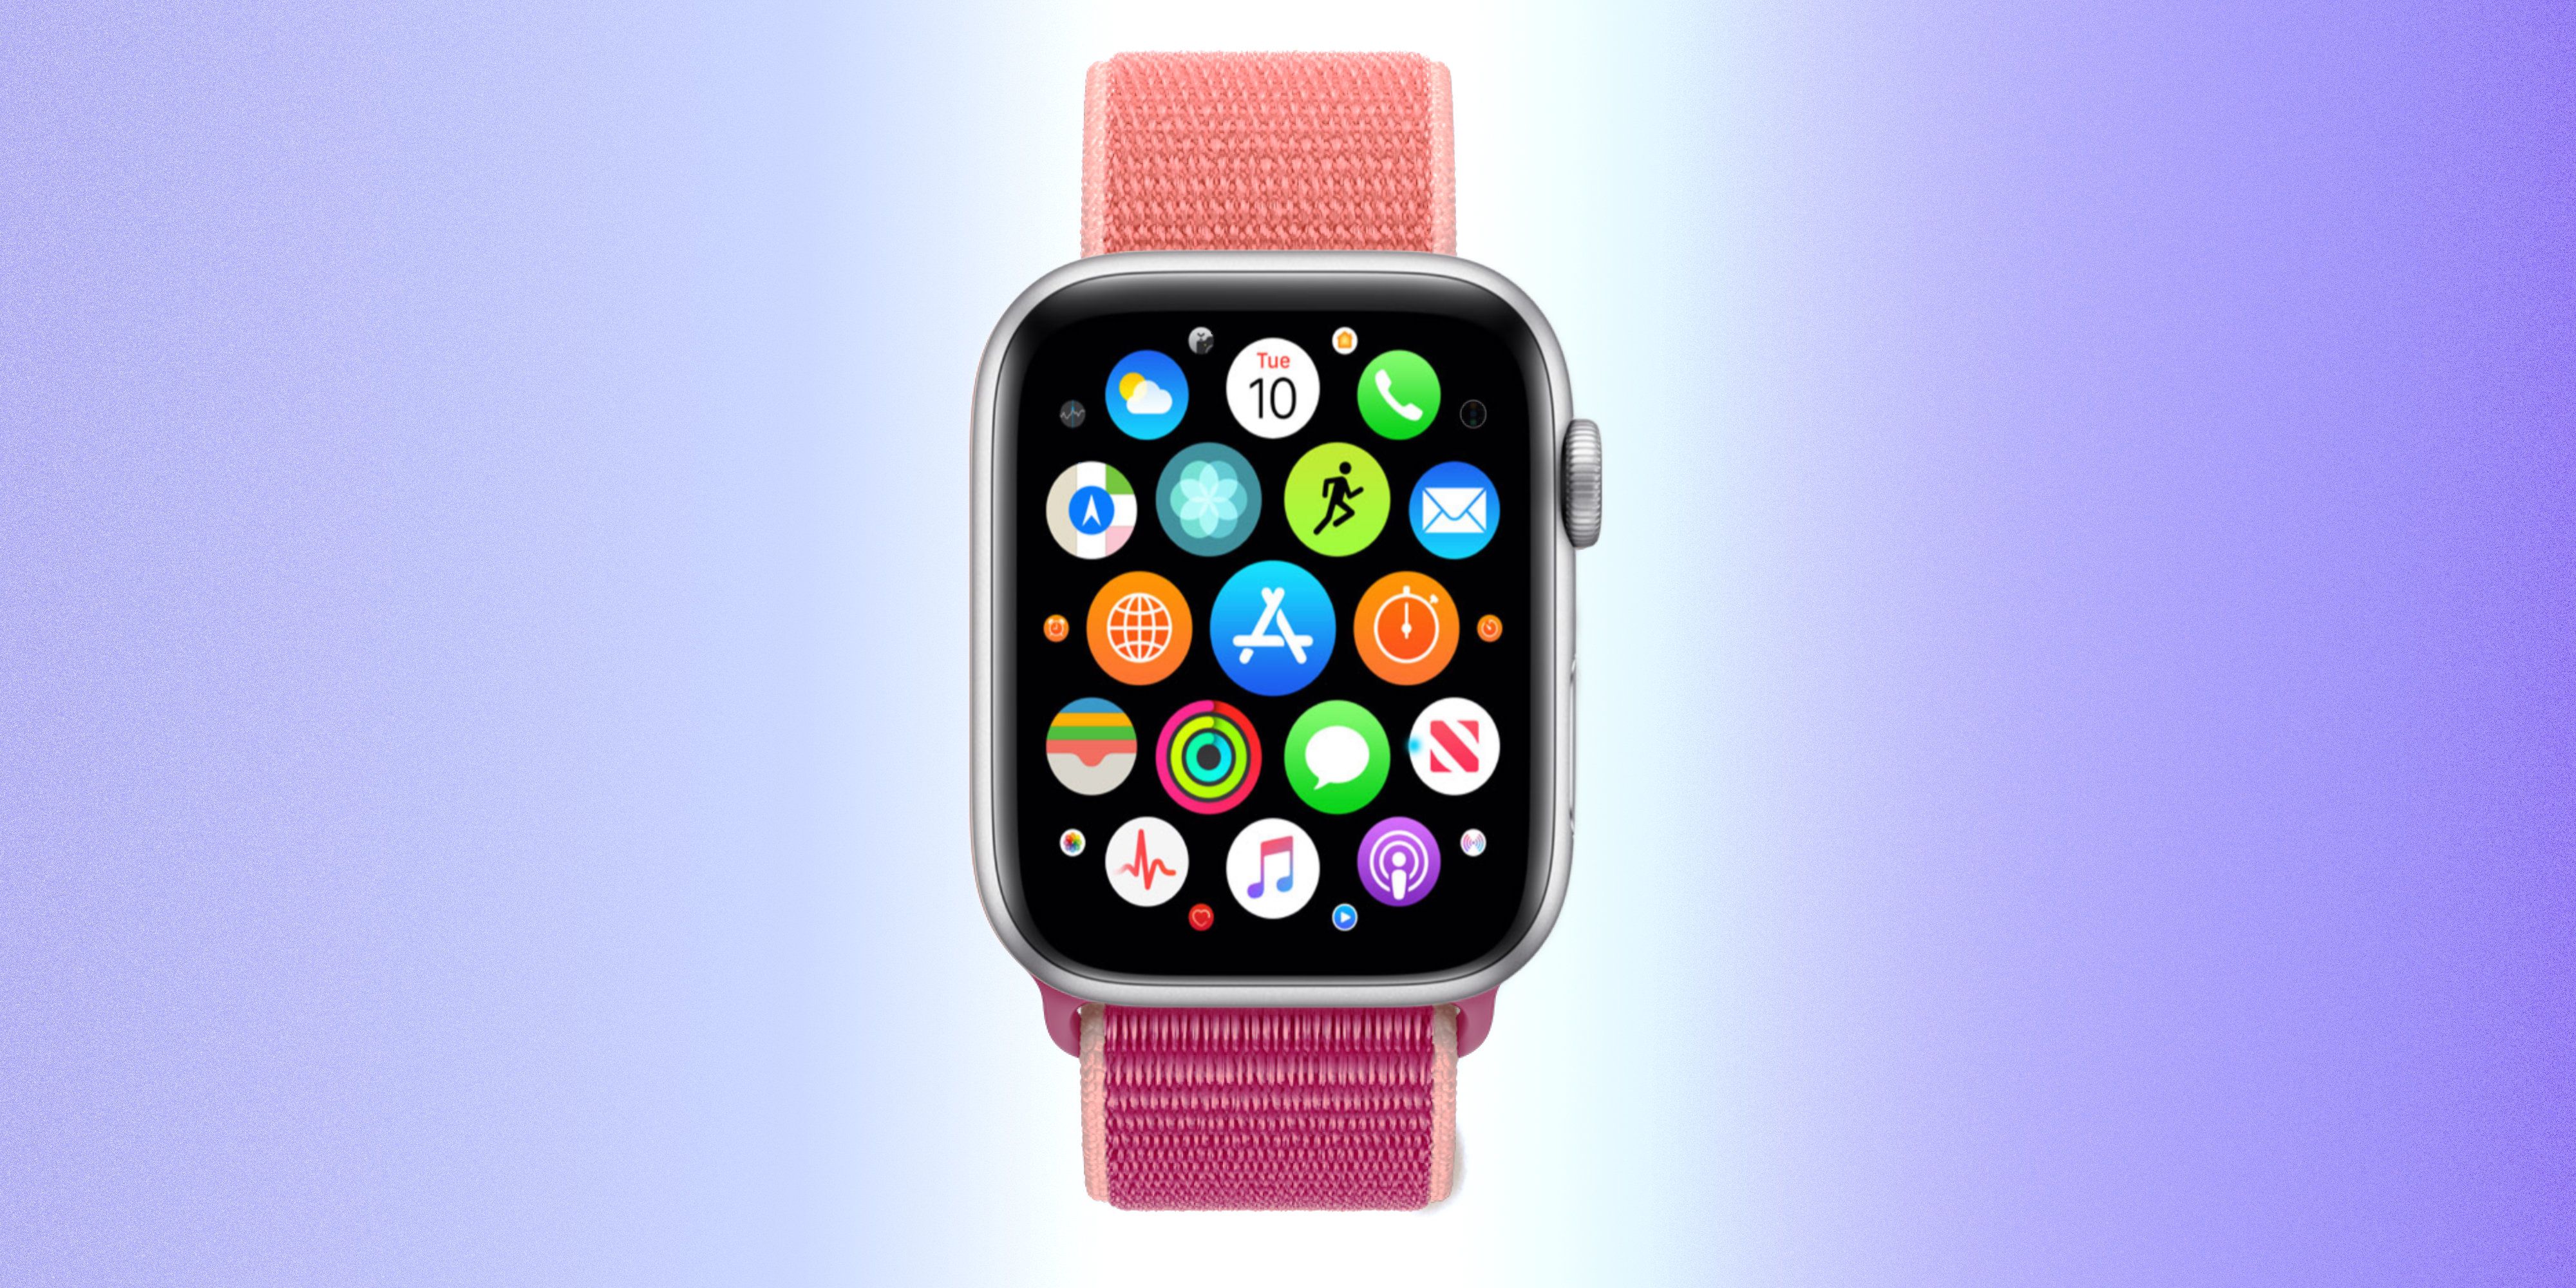 Apple Watch MustHave Apps That Will Make The Smartwatch Even Better